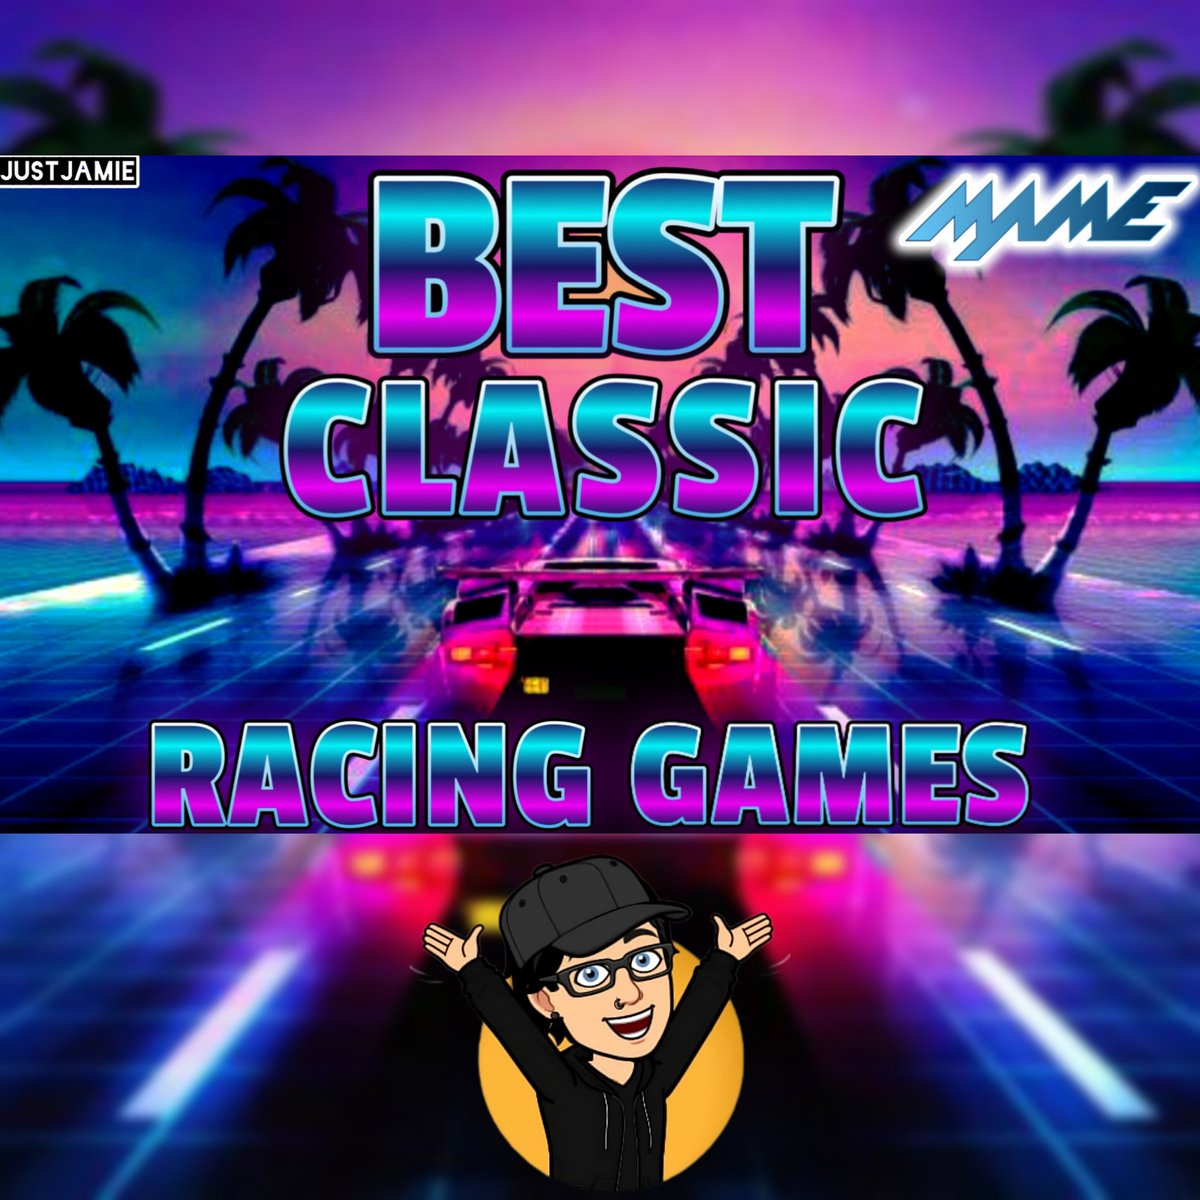 This is my top 10 personal favourite classic arcade racers for MAME. From arcade classics such as Chase HQ - Badlands. There is a lot here to potentially discover. youtu.be/k9yHrOoqpj0?si… #mame #arcadegames #arcadegaming #retrogaming #justjamie